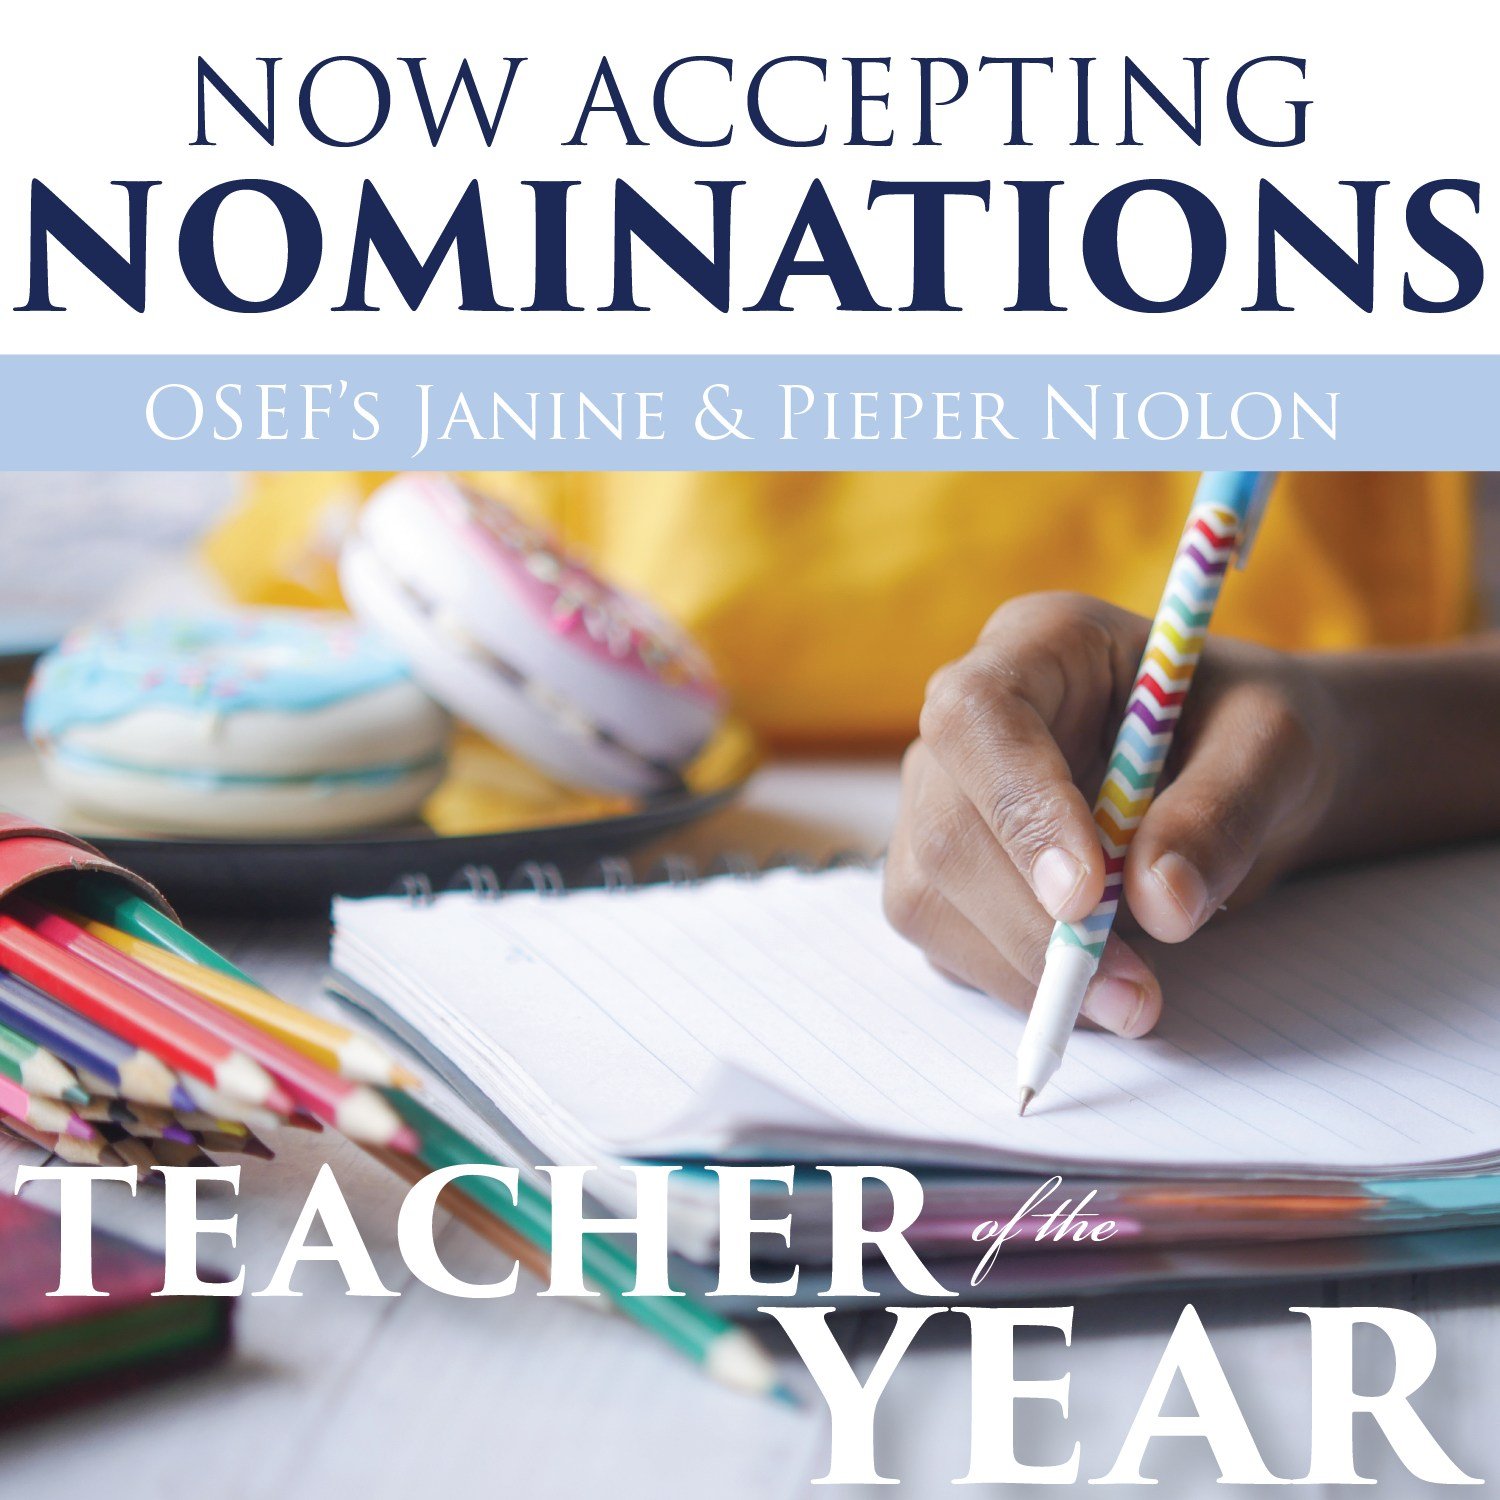 Established in 2012 in memory of the late Jan Niolon and her daughter Pieper, the OSEF Niolon Teacher of the Year award is presented annually to a teacher who has had a particular impact on a student&rsquo;s life. This $3,000 grant may be used $2,500